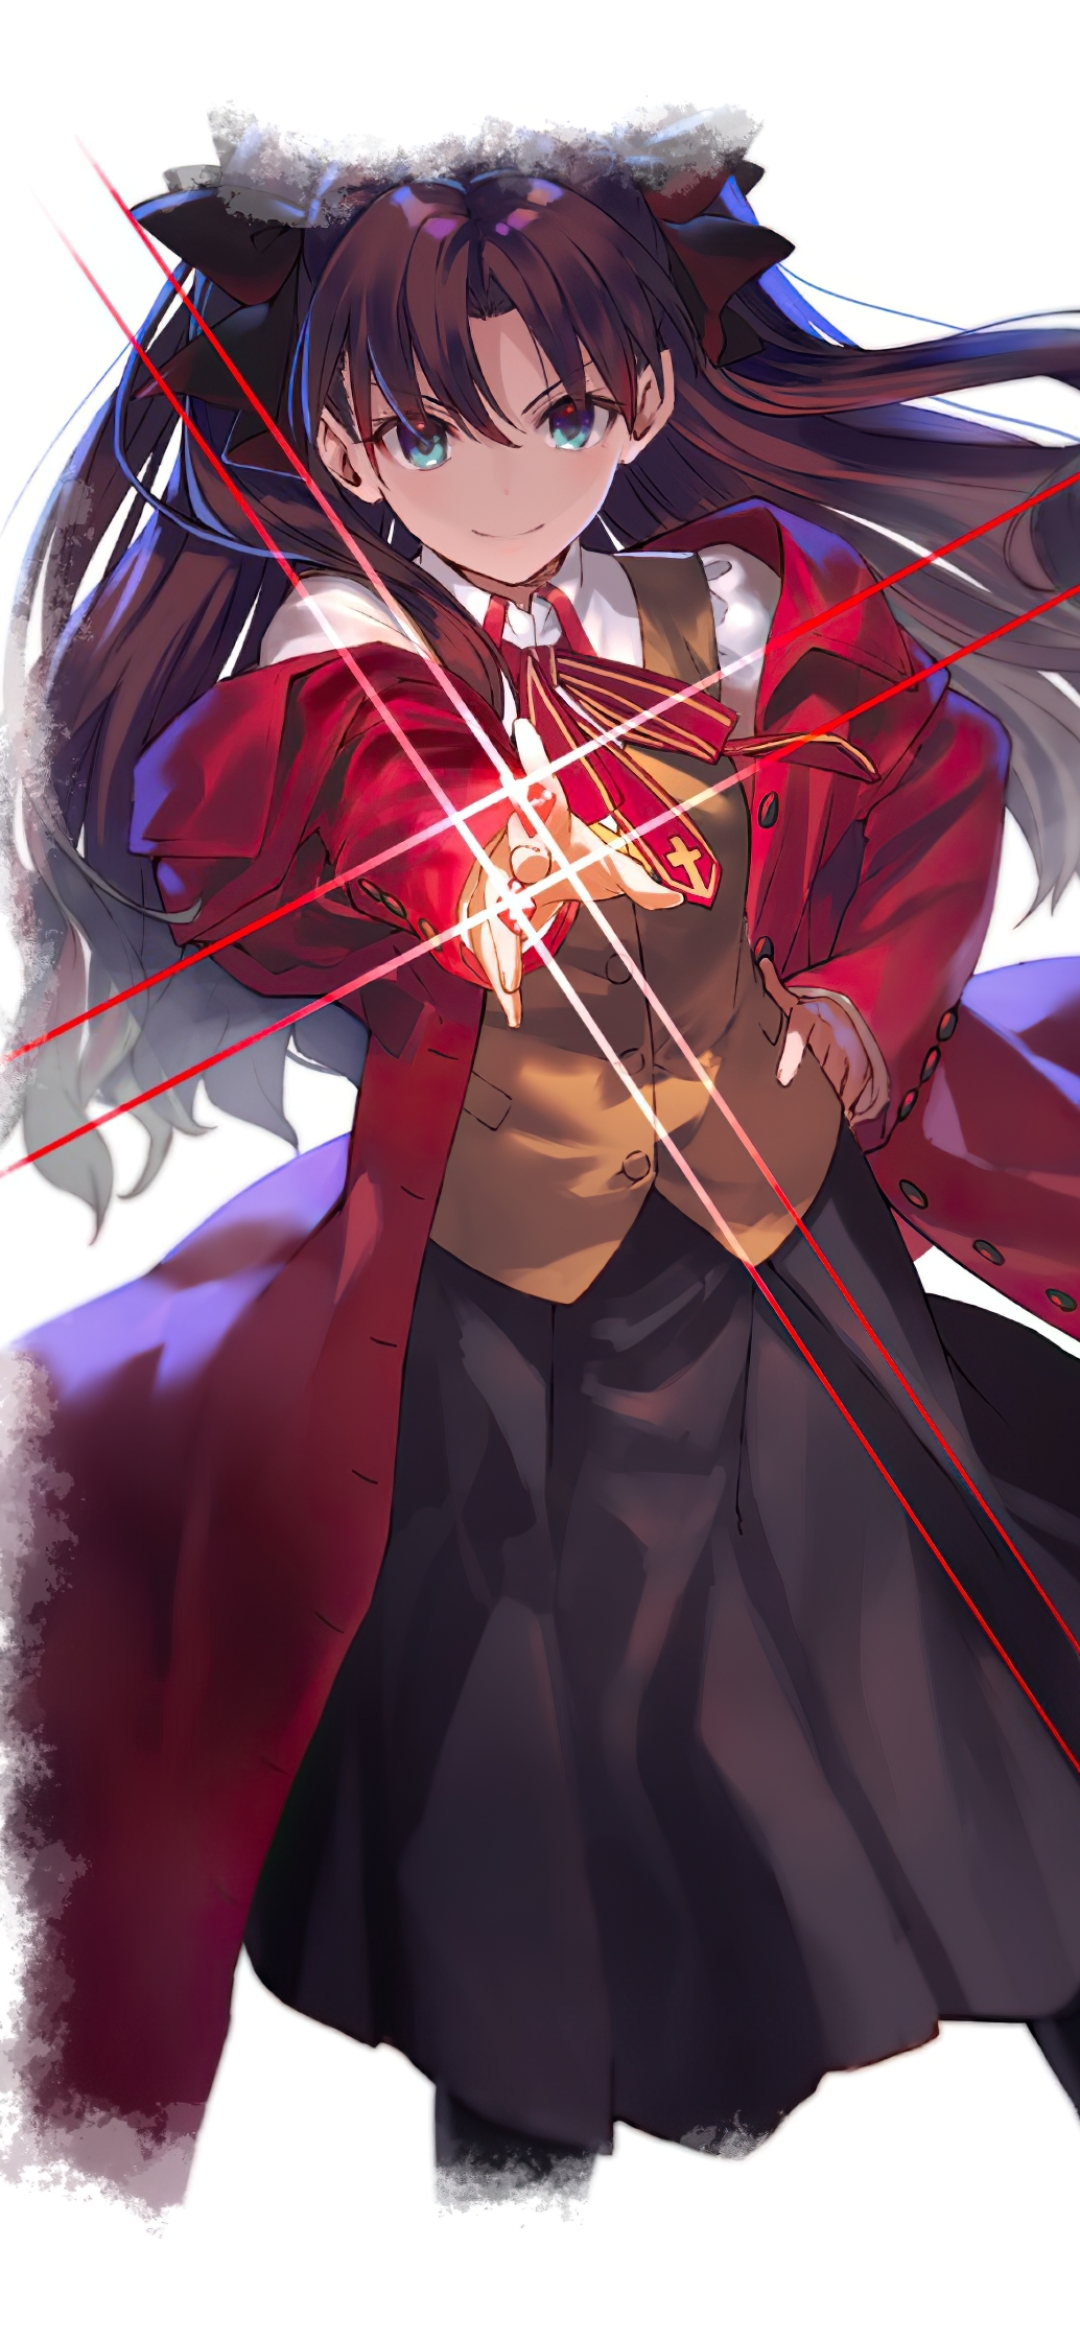 Fate/Stay Night Phone Wallpaper by しらび